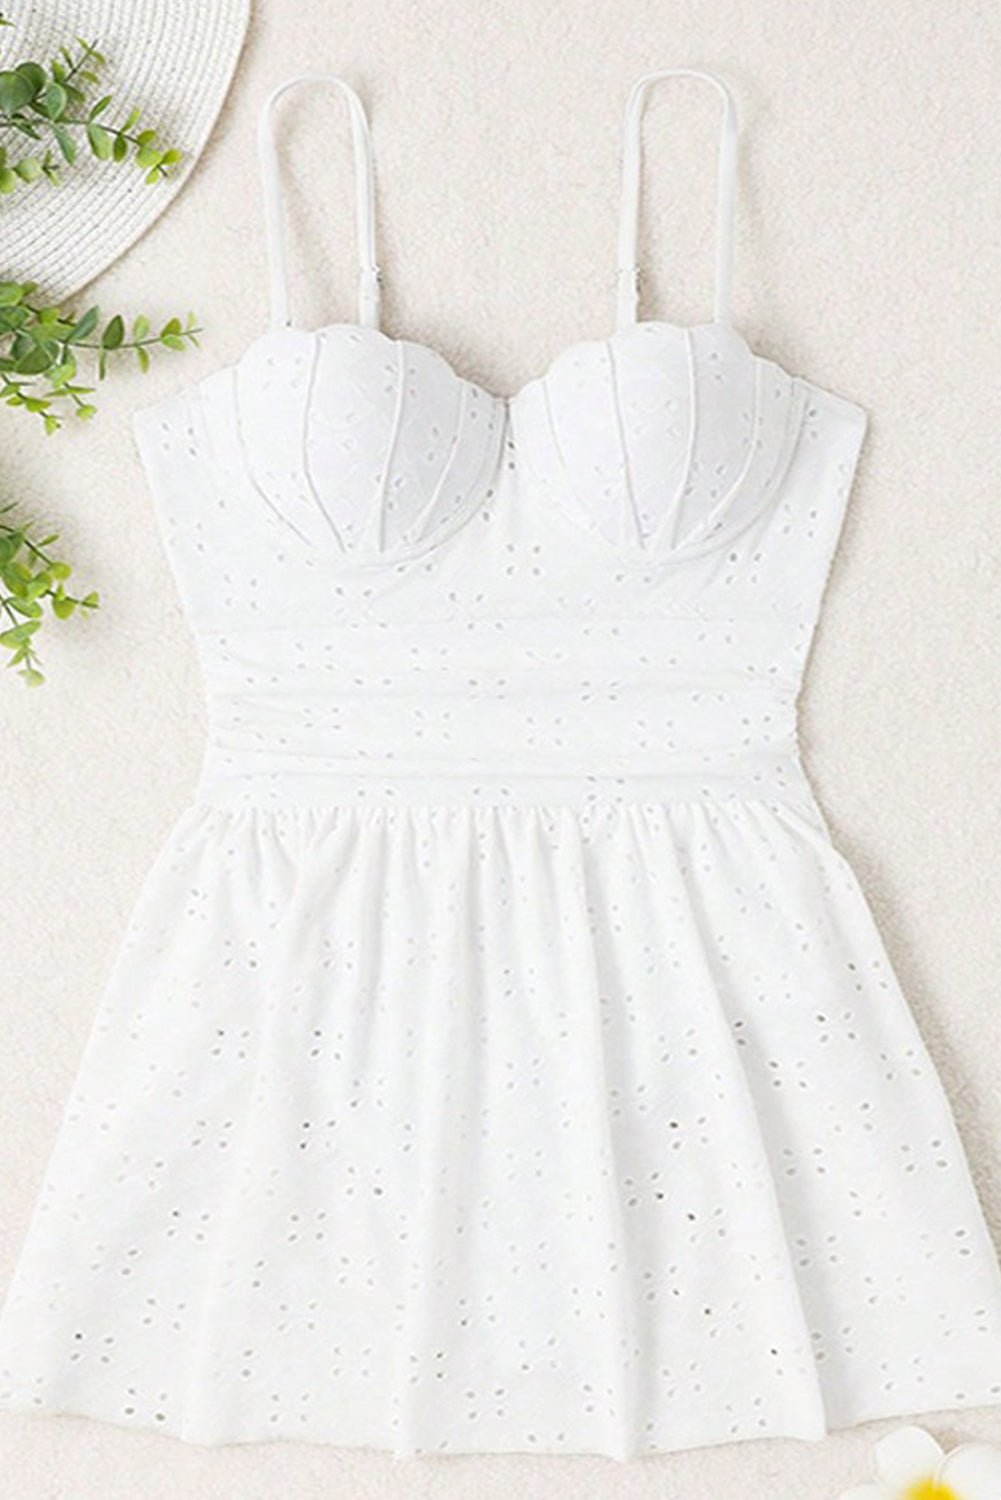 White Eyelet Padded Fit and Flare Two Piece Tankini Set